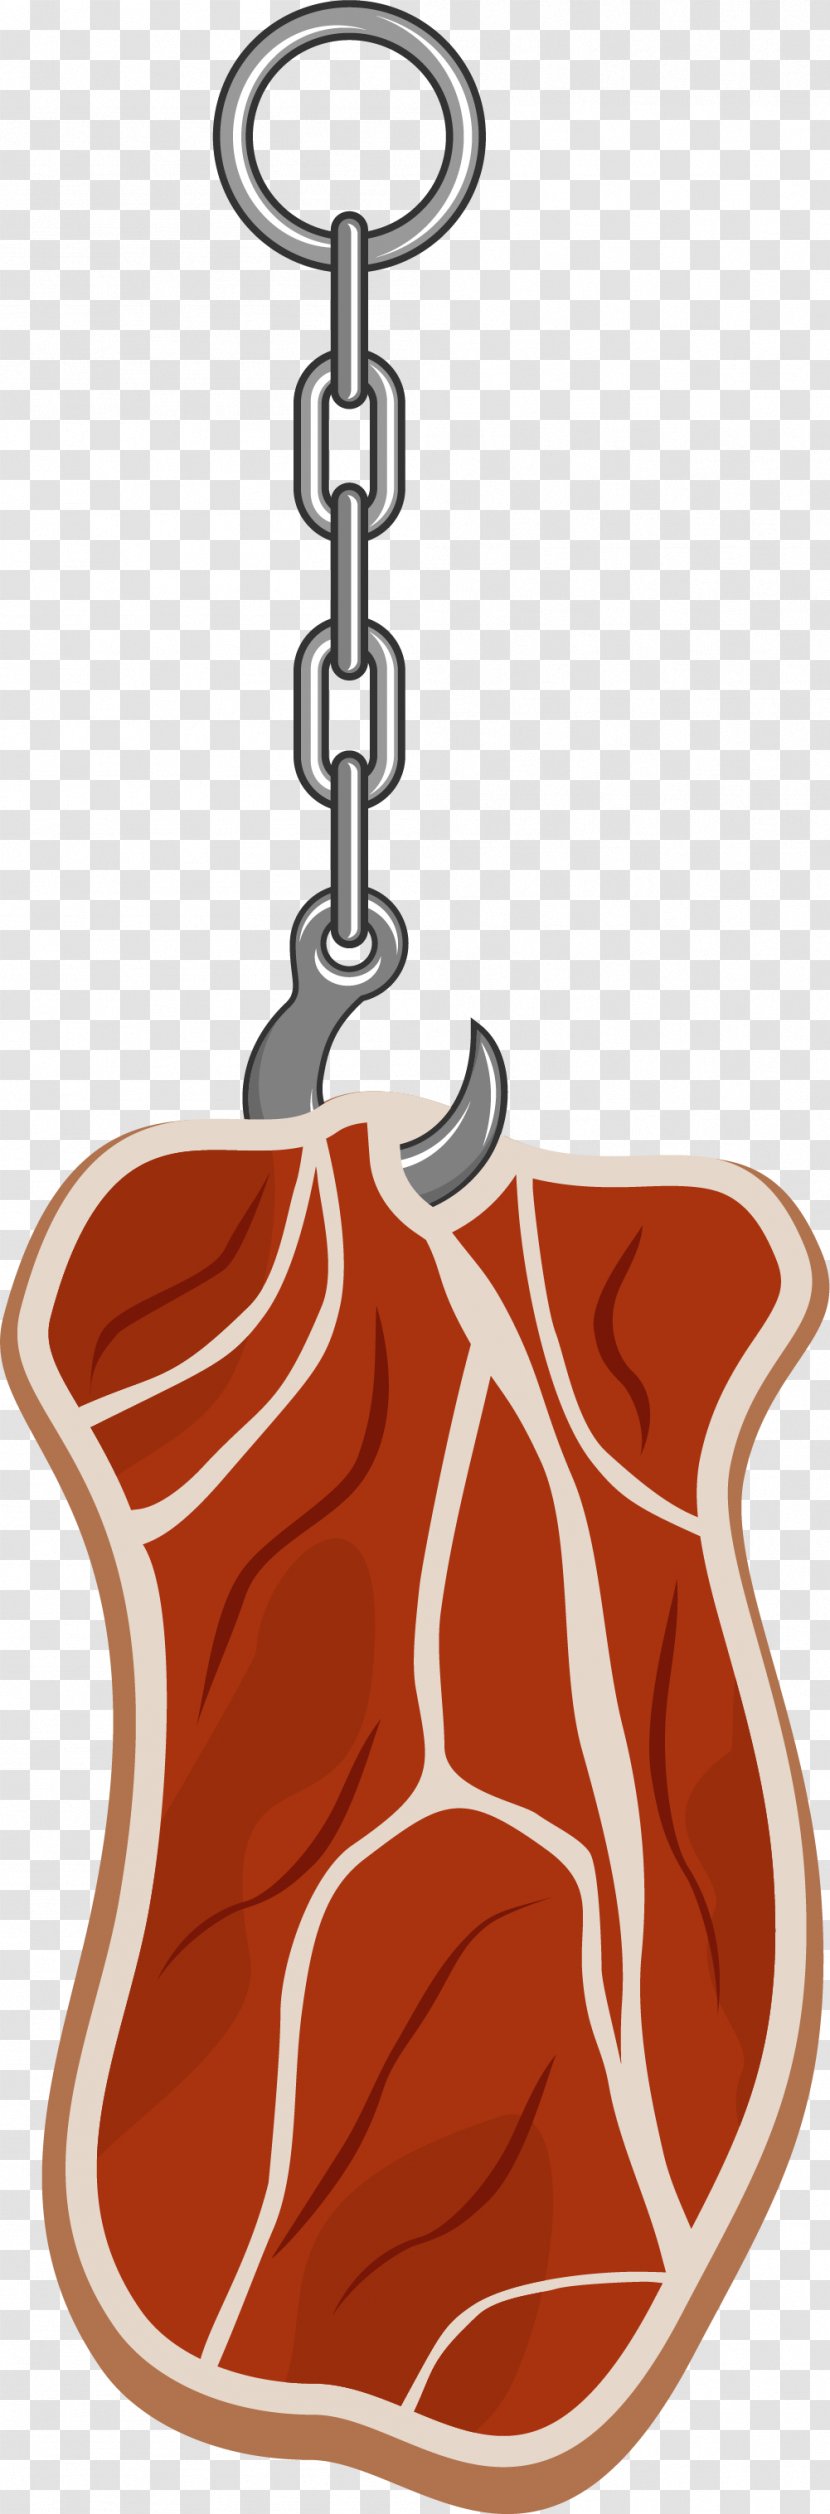 Steak Meat - Frame - Hand Painted Red Hook Transparent PNG